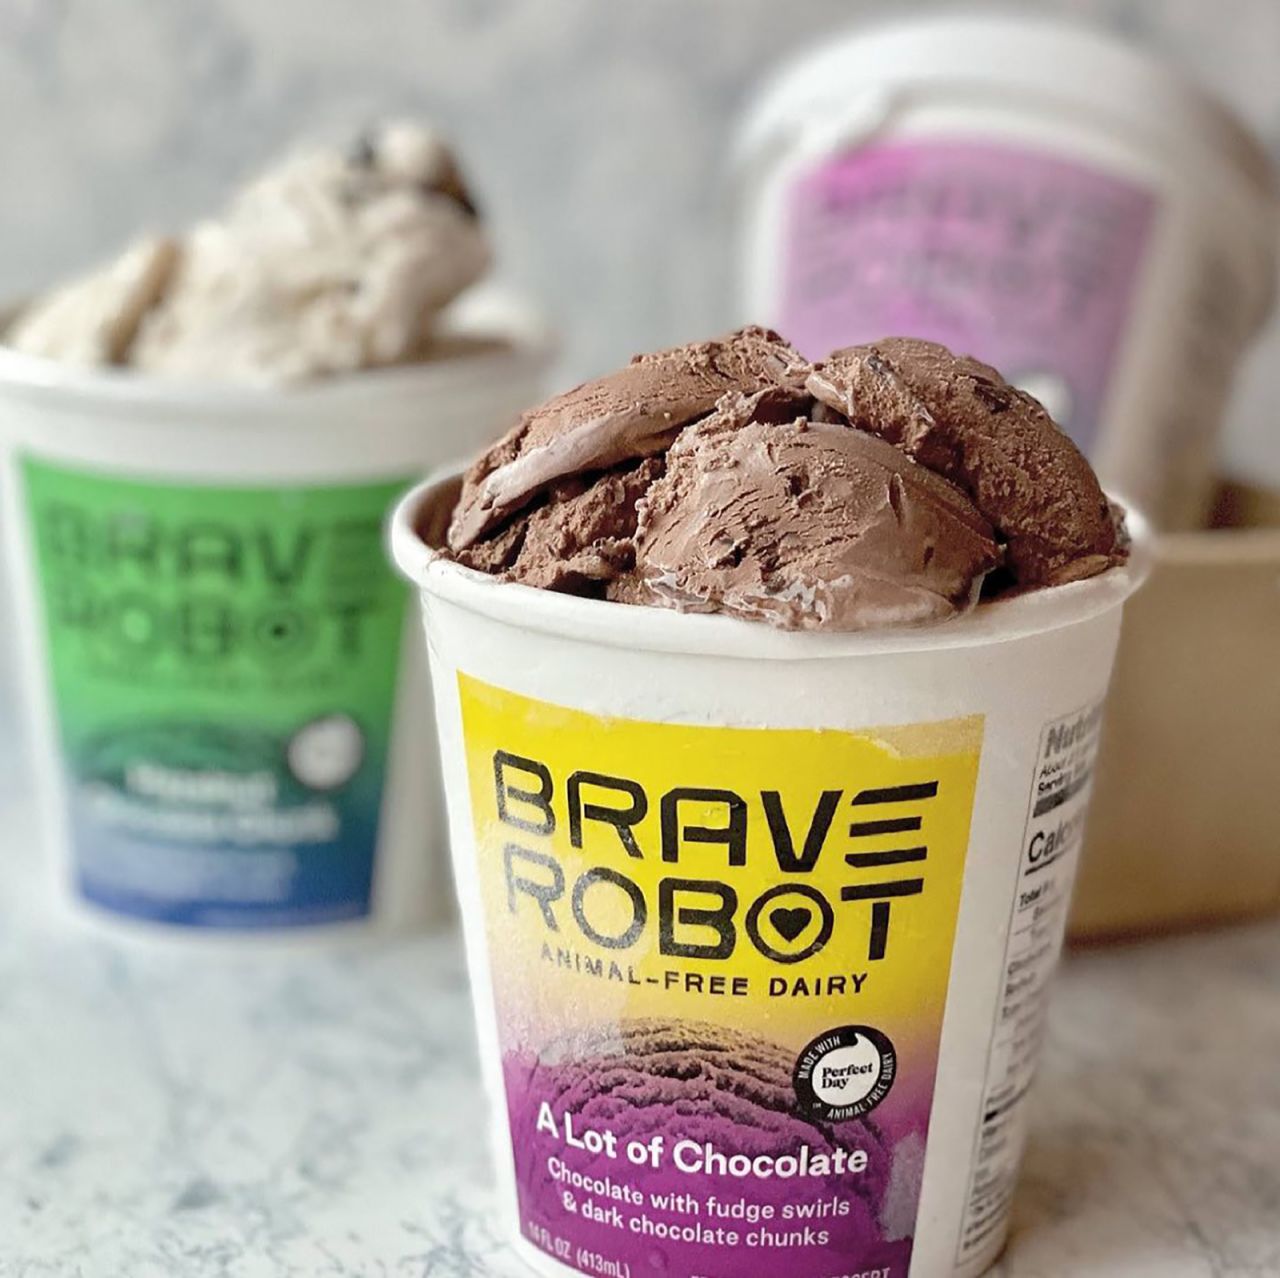 Perfect Day's milk protein is already being used in ice cream products in Hong Kong and the US, including Brave Robot. The animal-free ice cream also contains no lactose.